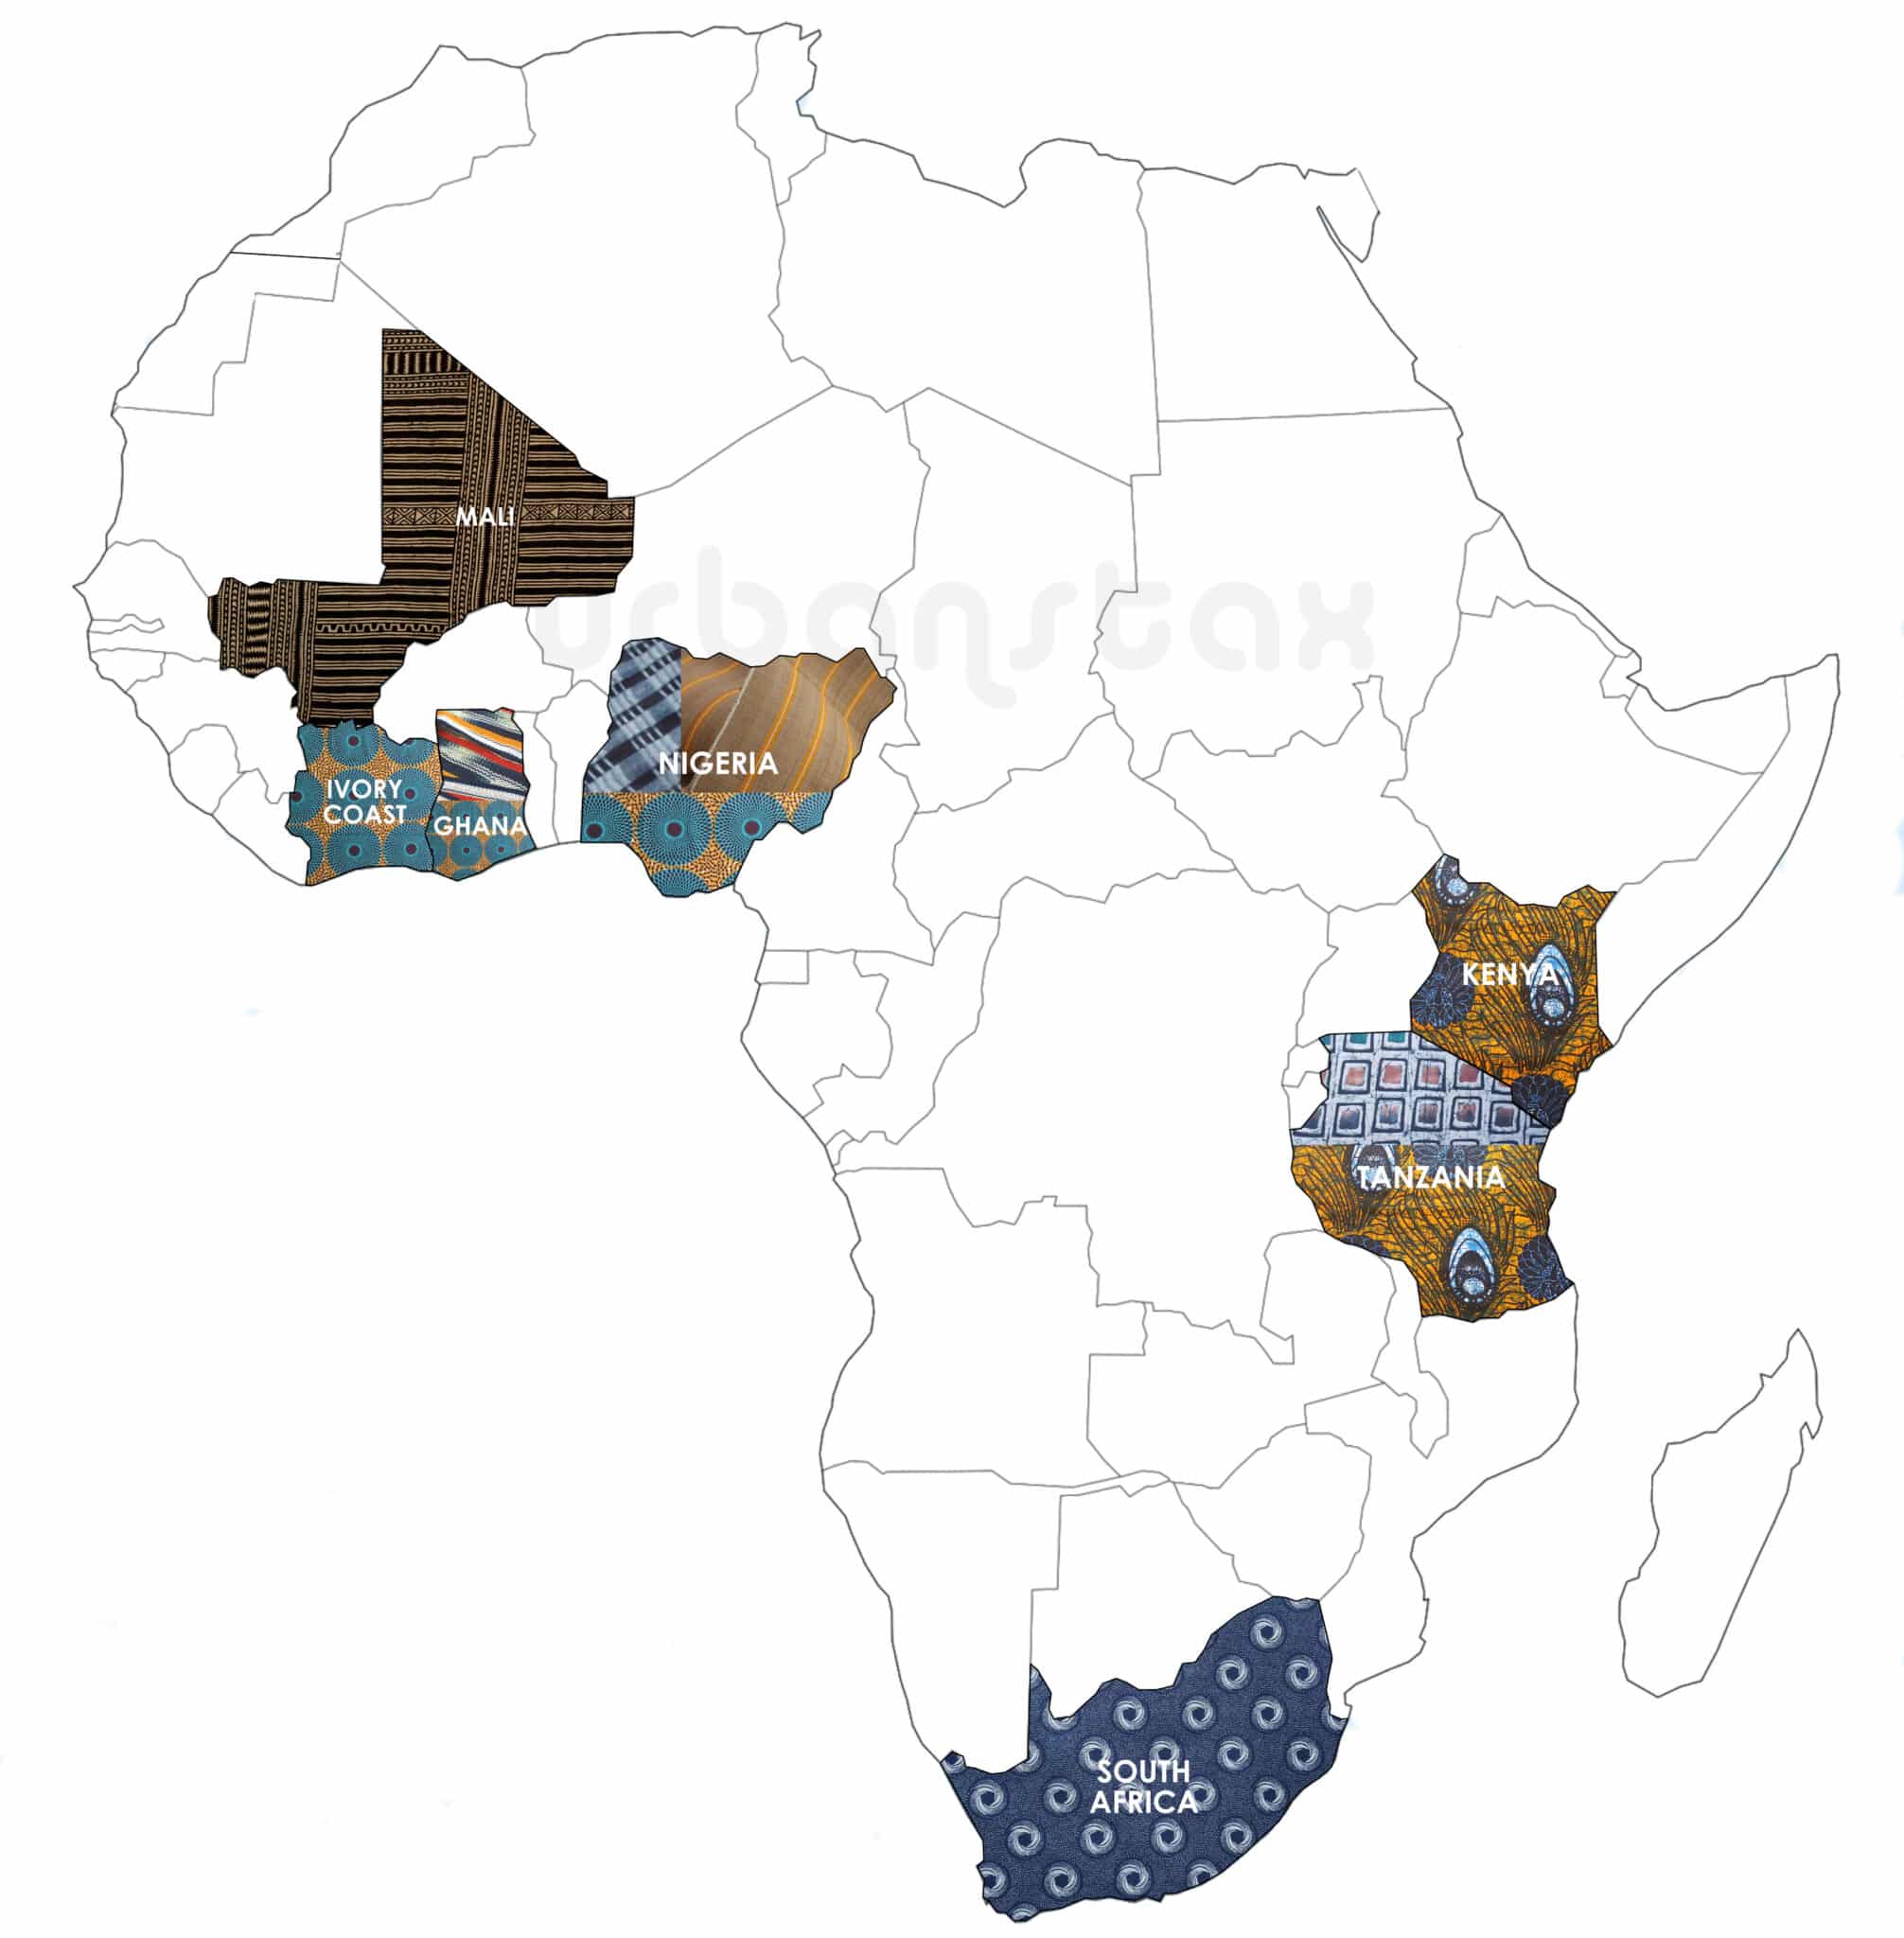 African textile map showing different types of African textiles